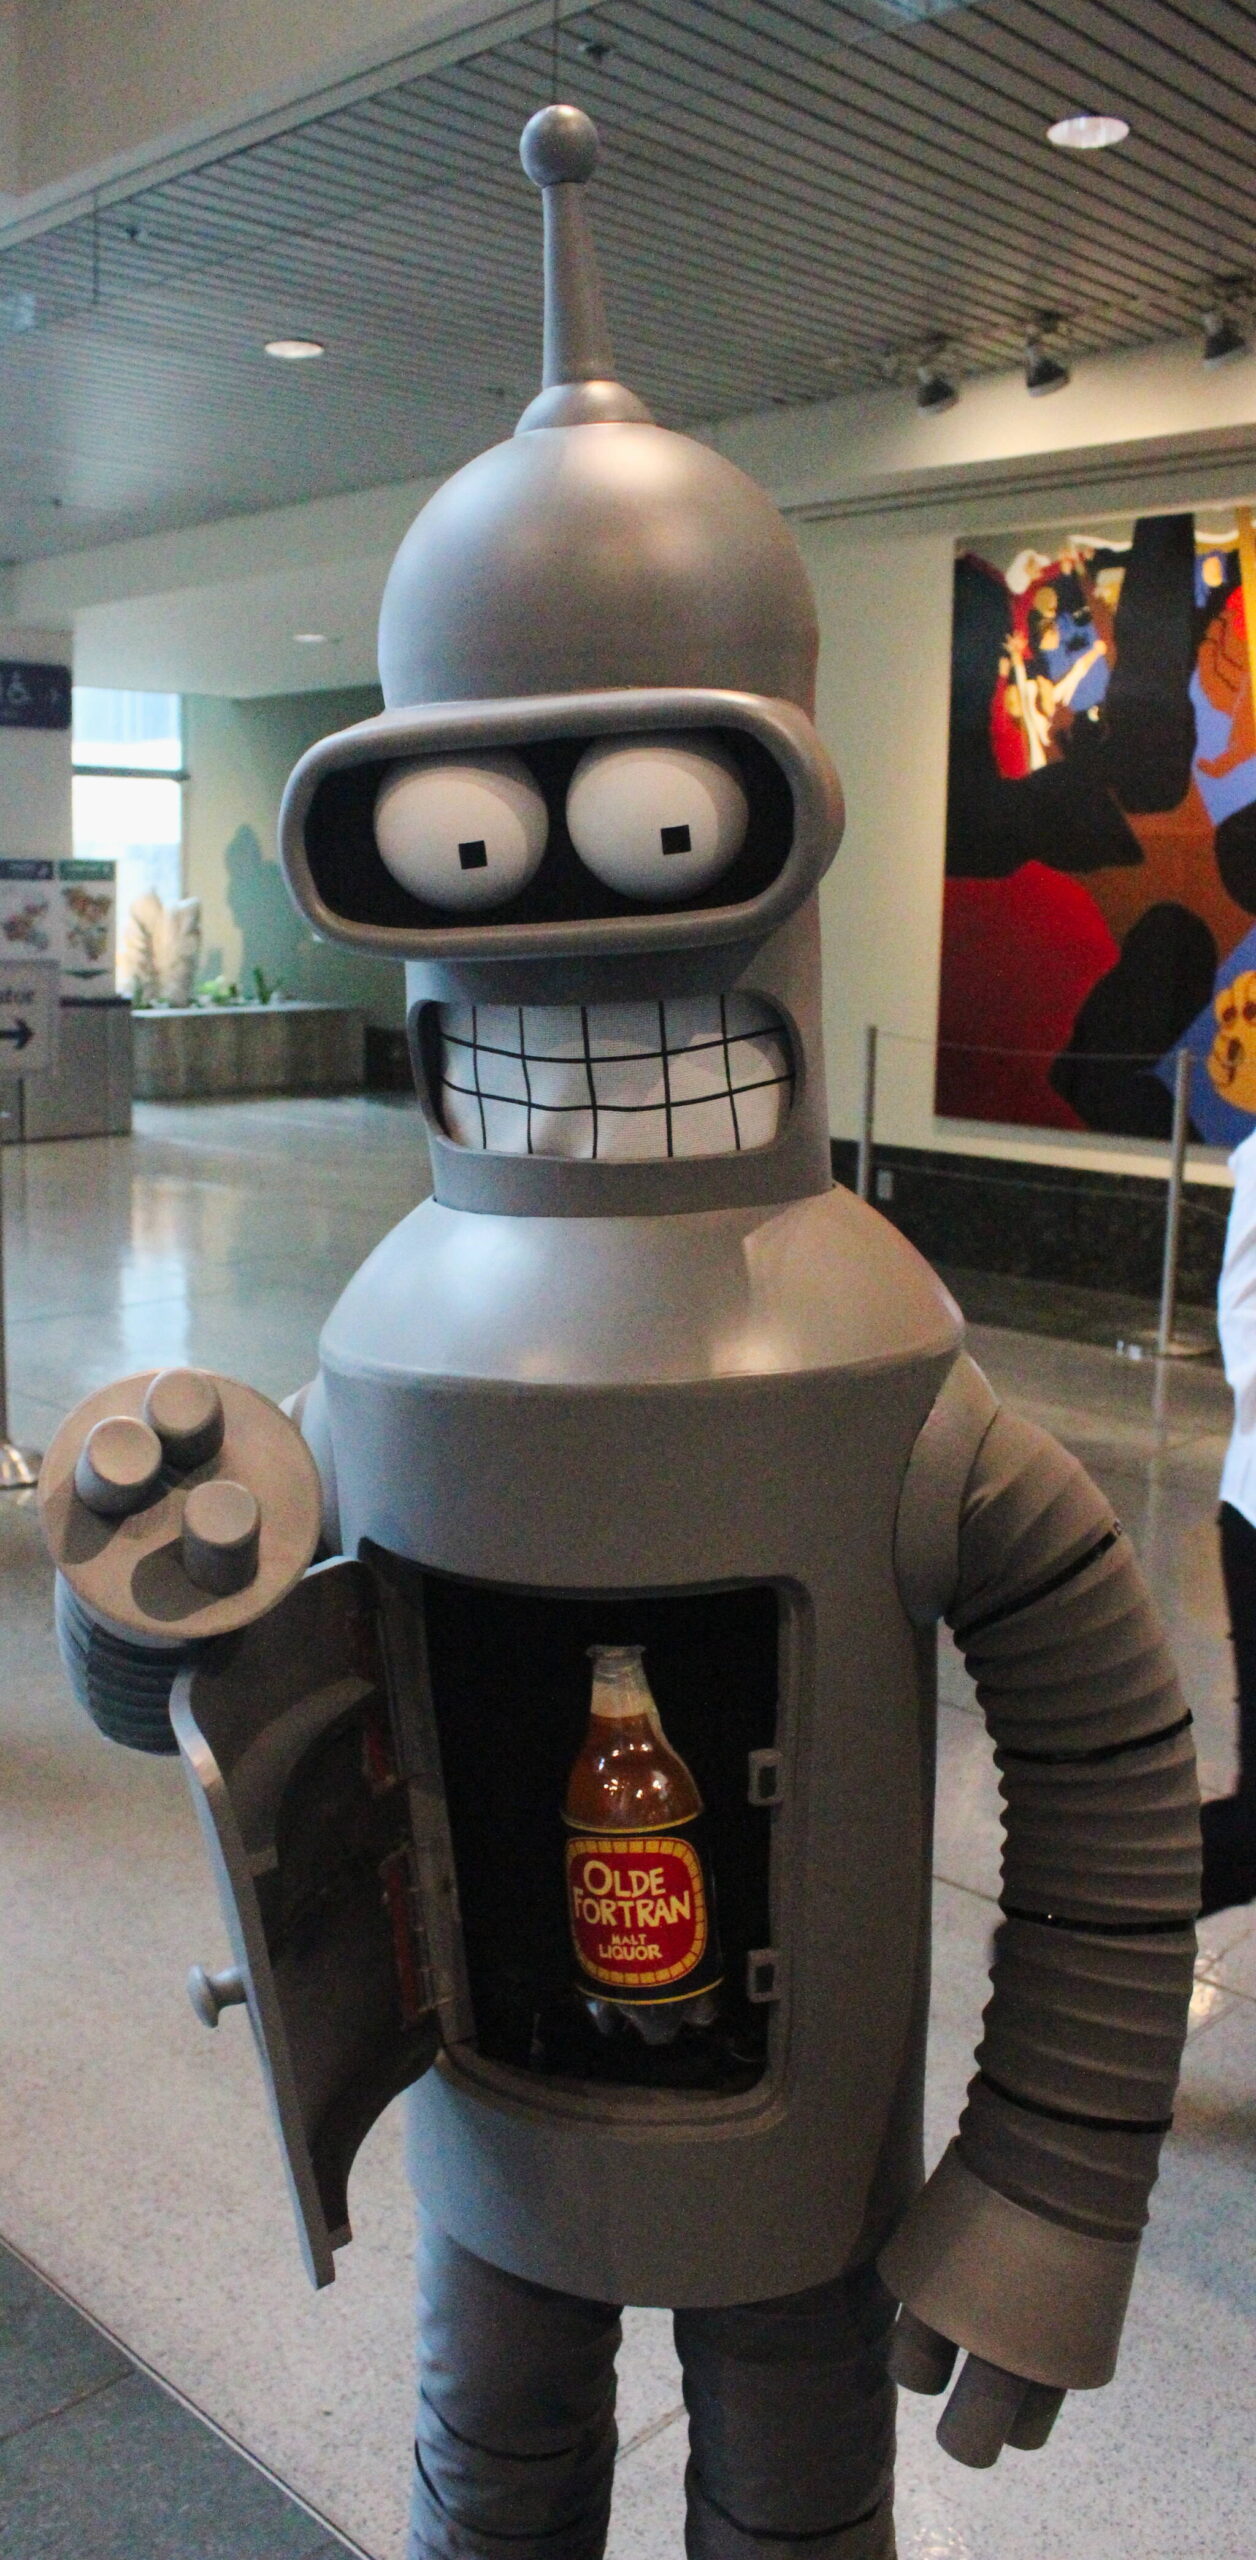 One young dedicated cosplayer went all out as Bender from the beloved animated series “Futurama.” Photo by Bailey Jo Josie/Sound Publishing.